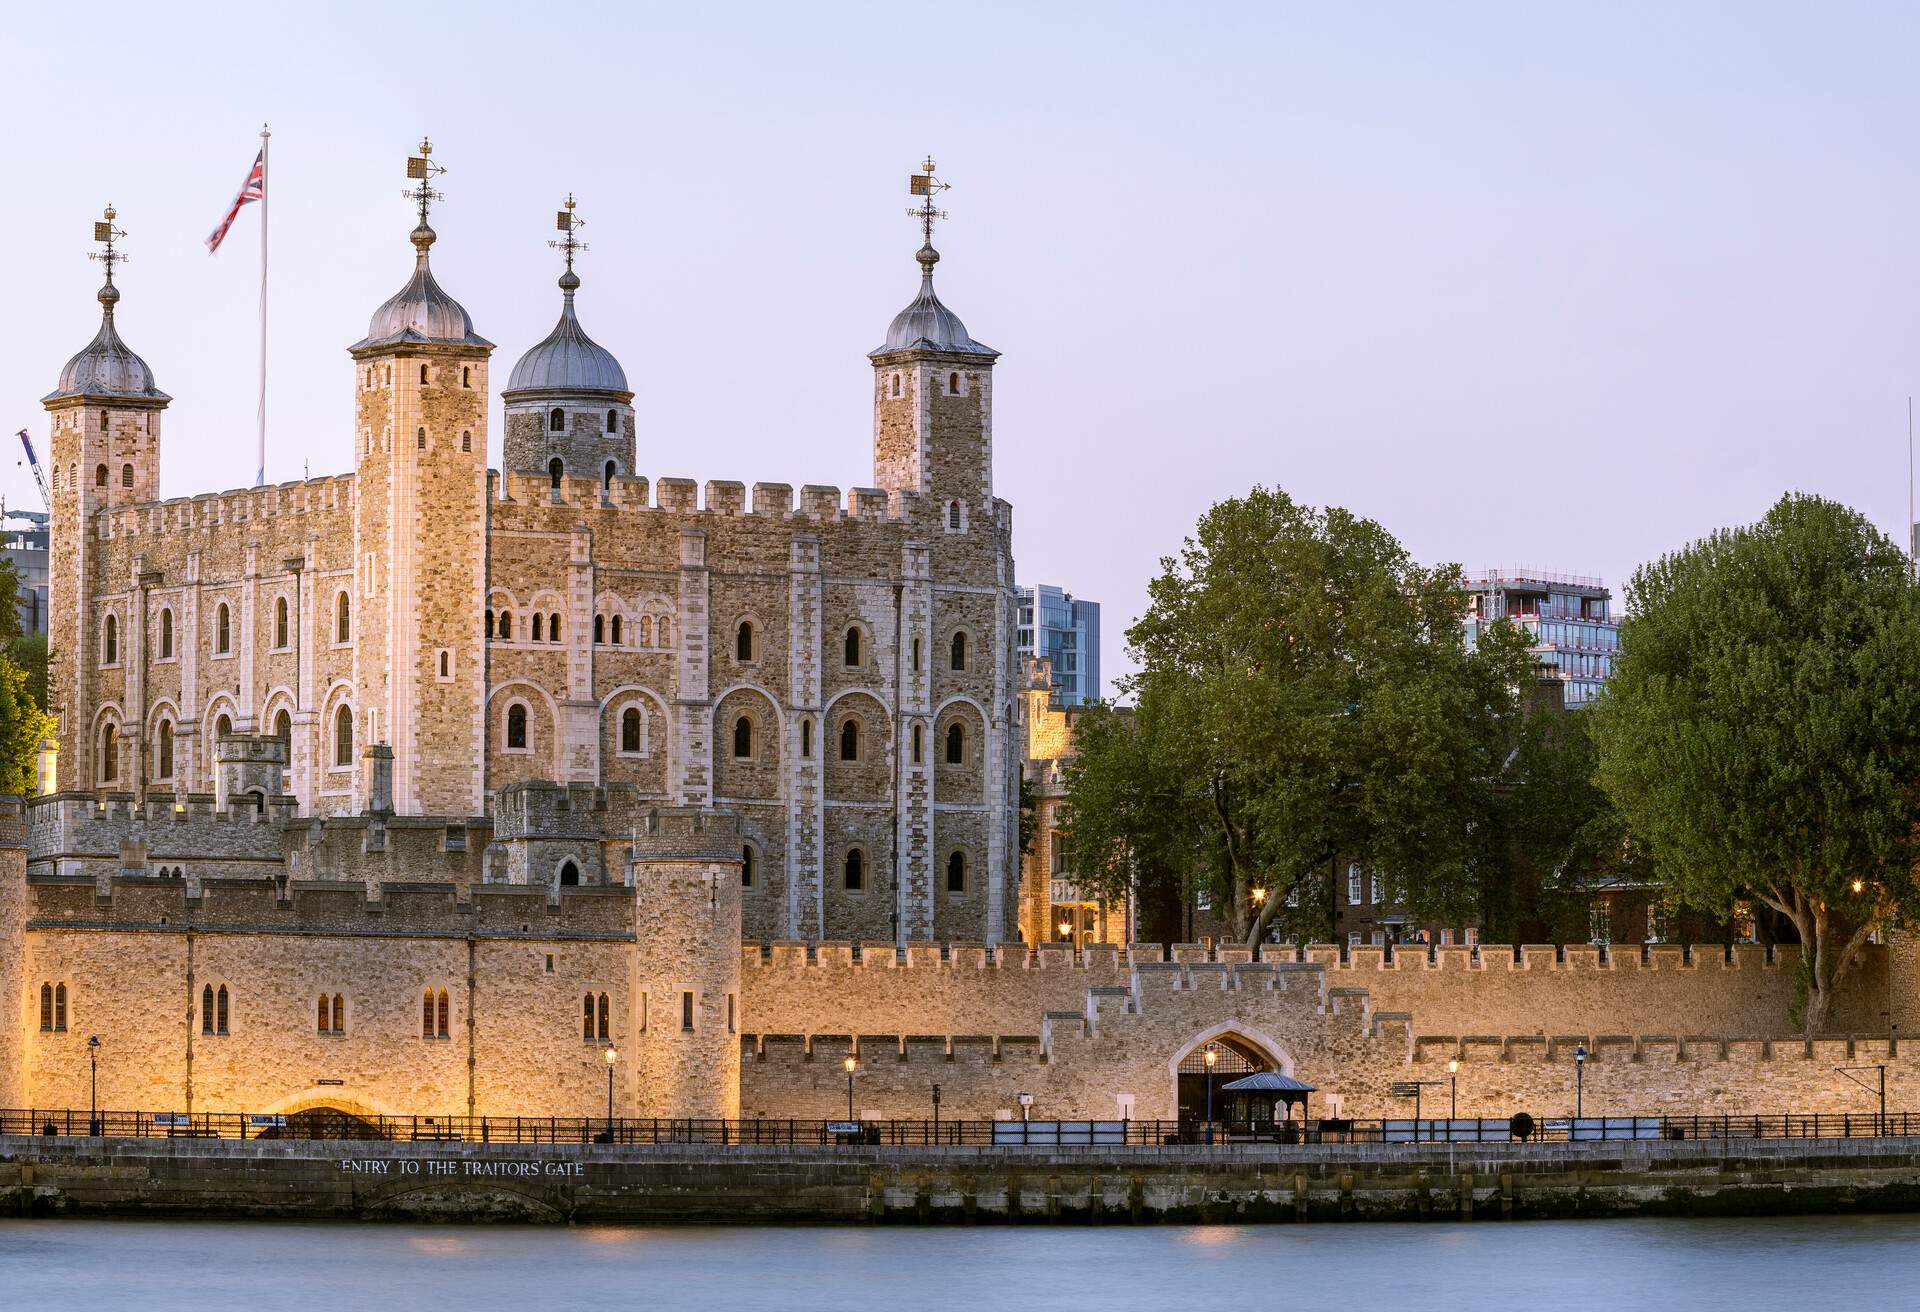 DEST_ENGLAND_LONDON_TOWER_OF_LONDON_GettyImages-1149072317